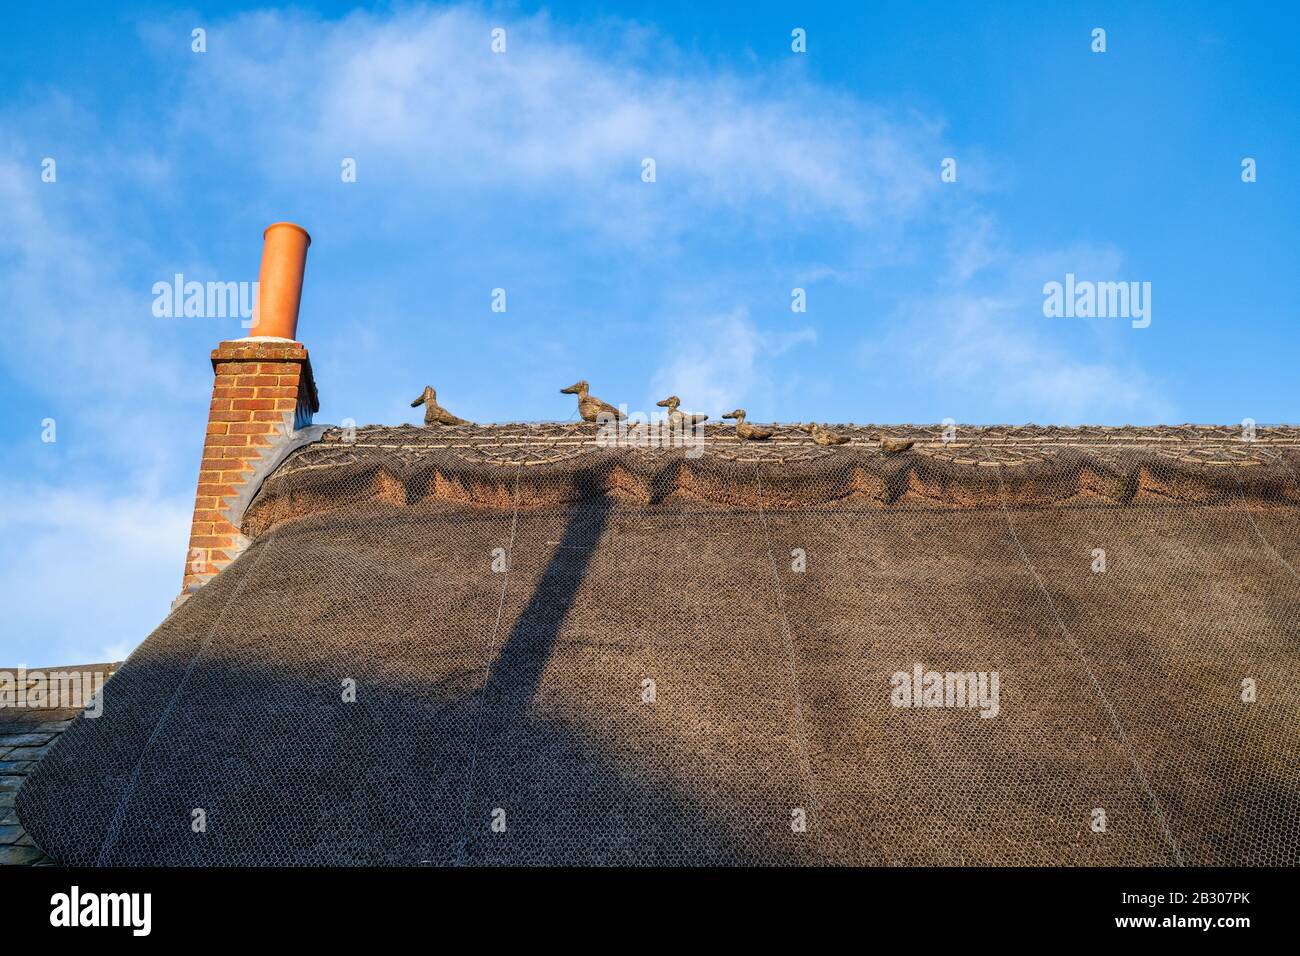 Thatch duck family on top of a thatched cottage roof in winter sunlight. Bledington, Cotswolds, Gloucestershire, England Stock Photo